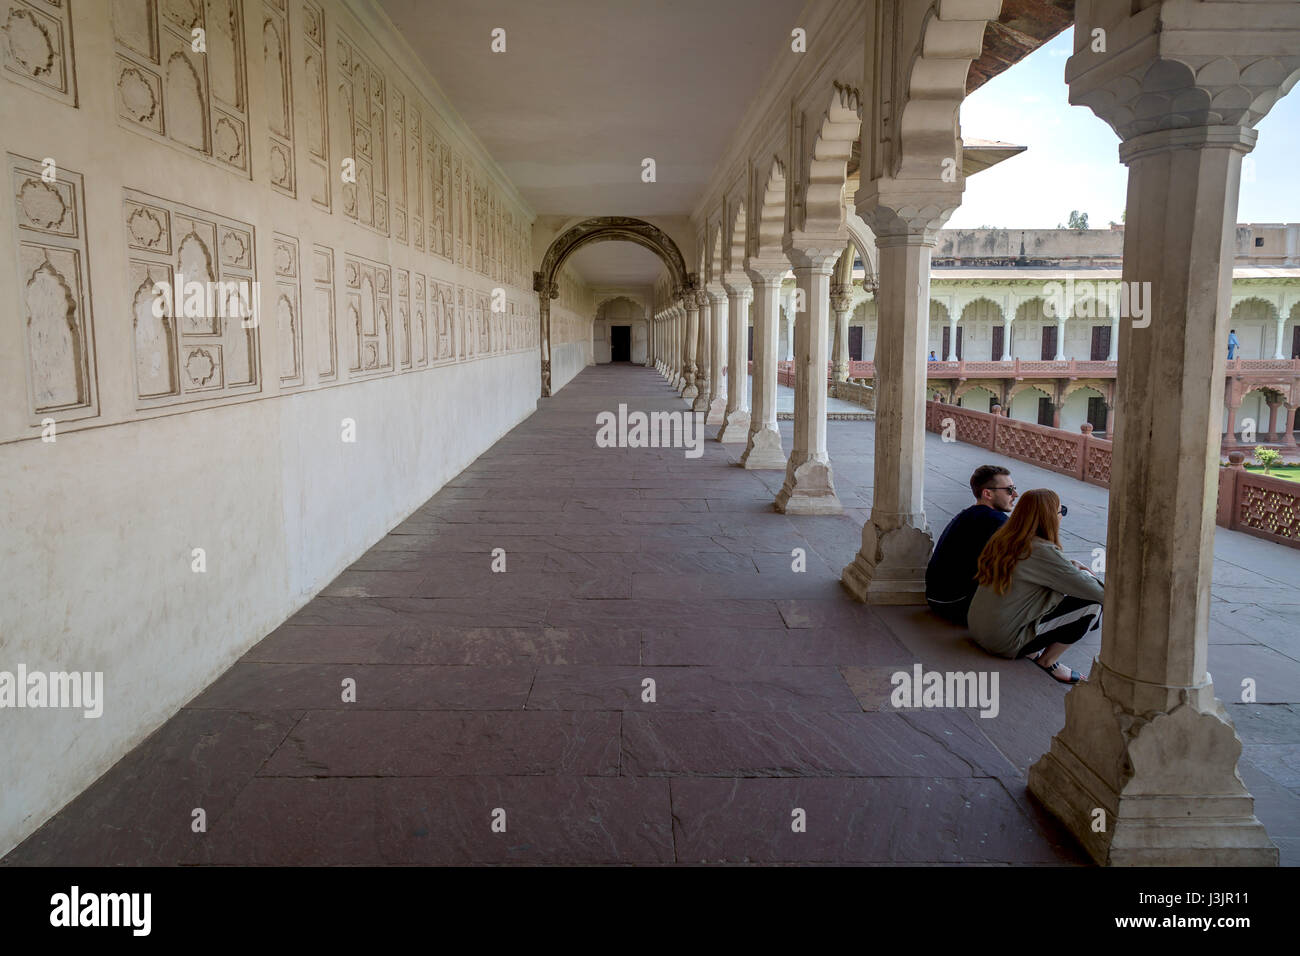 Tourists enjoy a moment in solitude in the corridor of Agra Fort. Agra Fort being a world heritage site is a primary tourist attraction at Agra, India Stock Photo